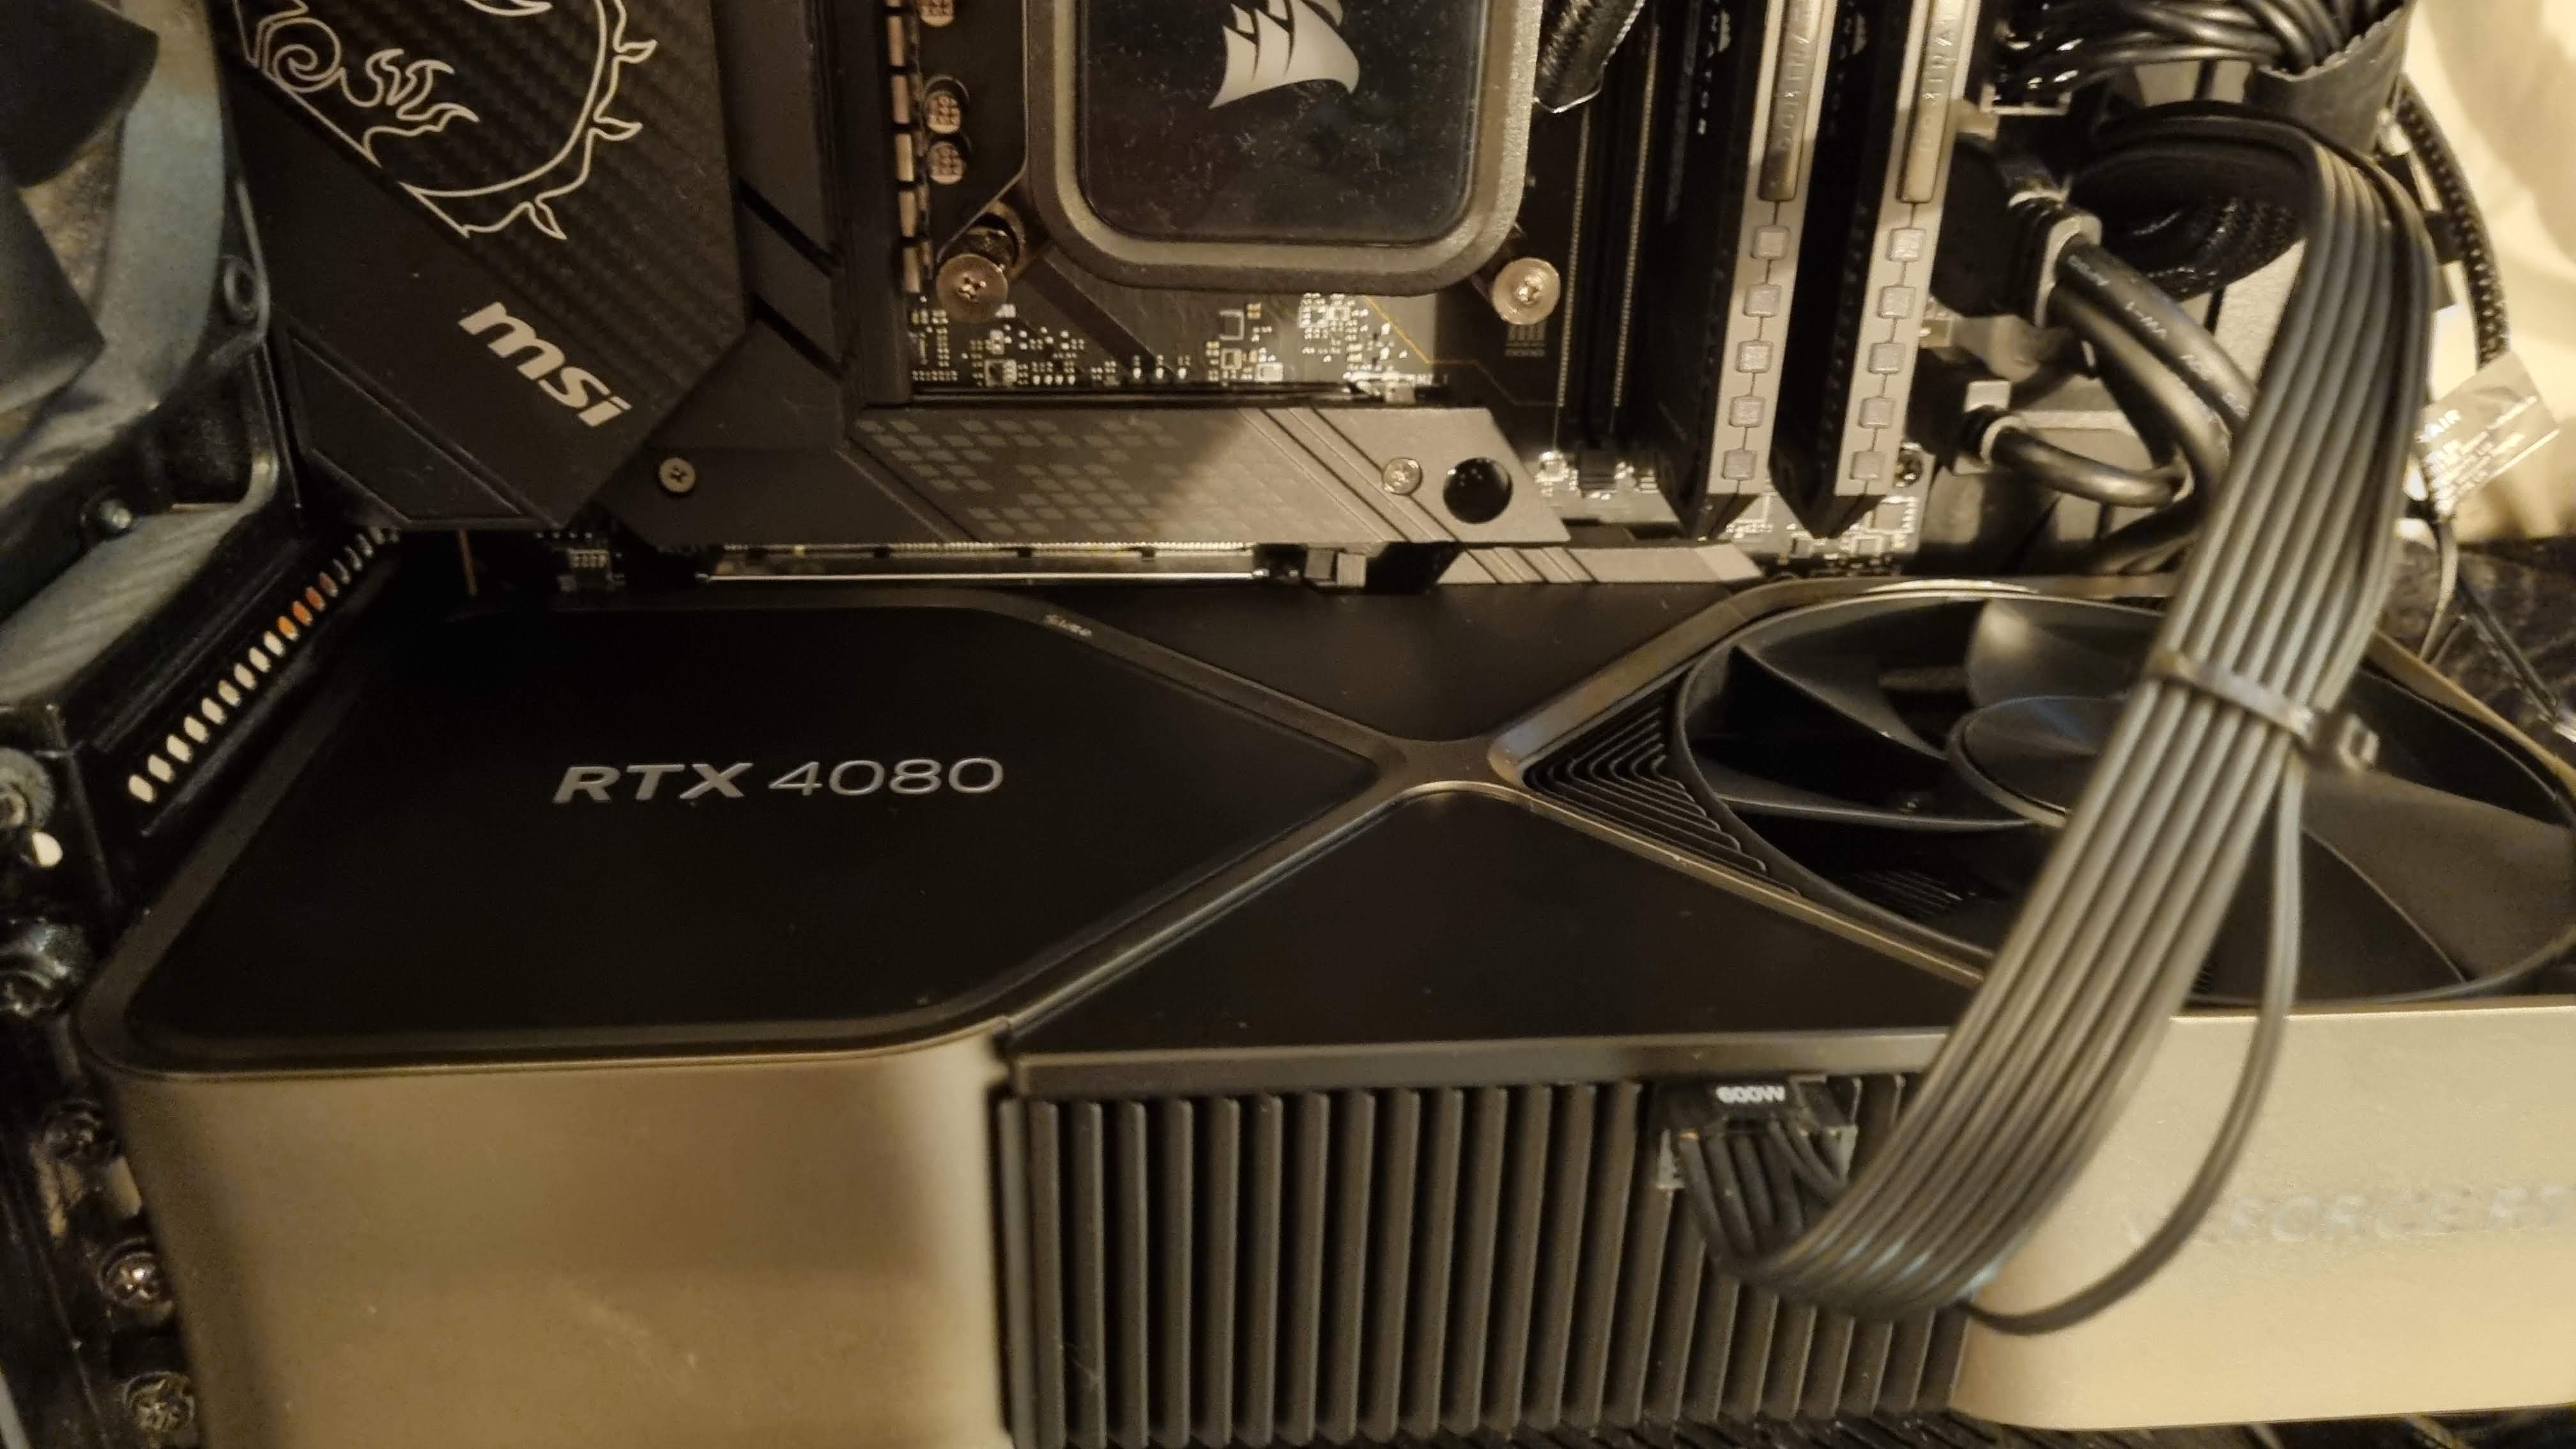 RTX 4080 GPU installed in motherboard